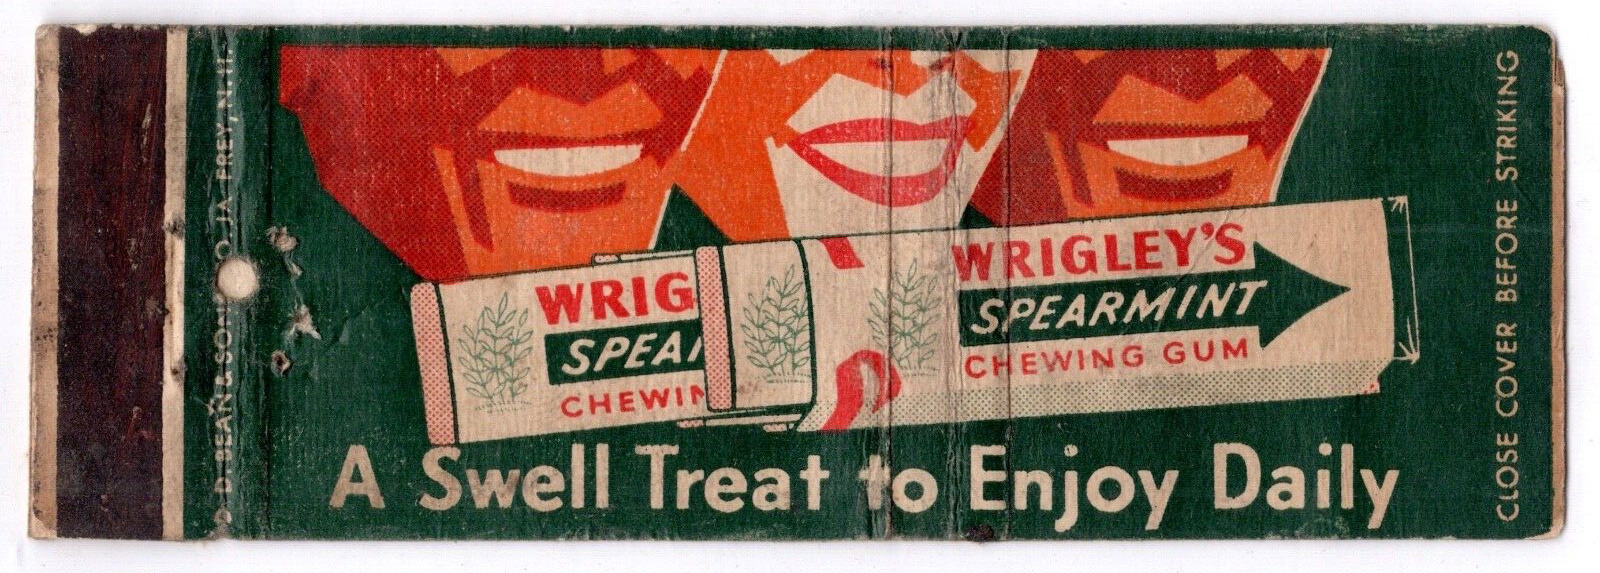 1950s Wrigley\'s Gum Spearmint Smiling White Teeth People Vintage Matchbook Cover